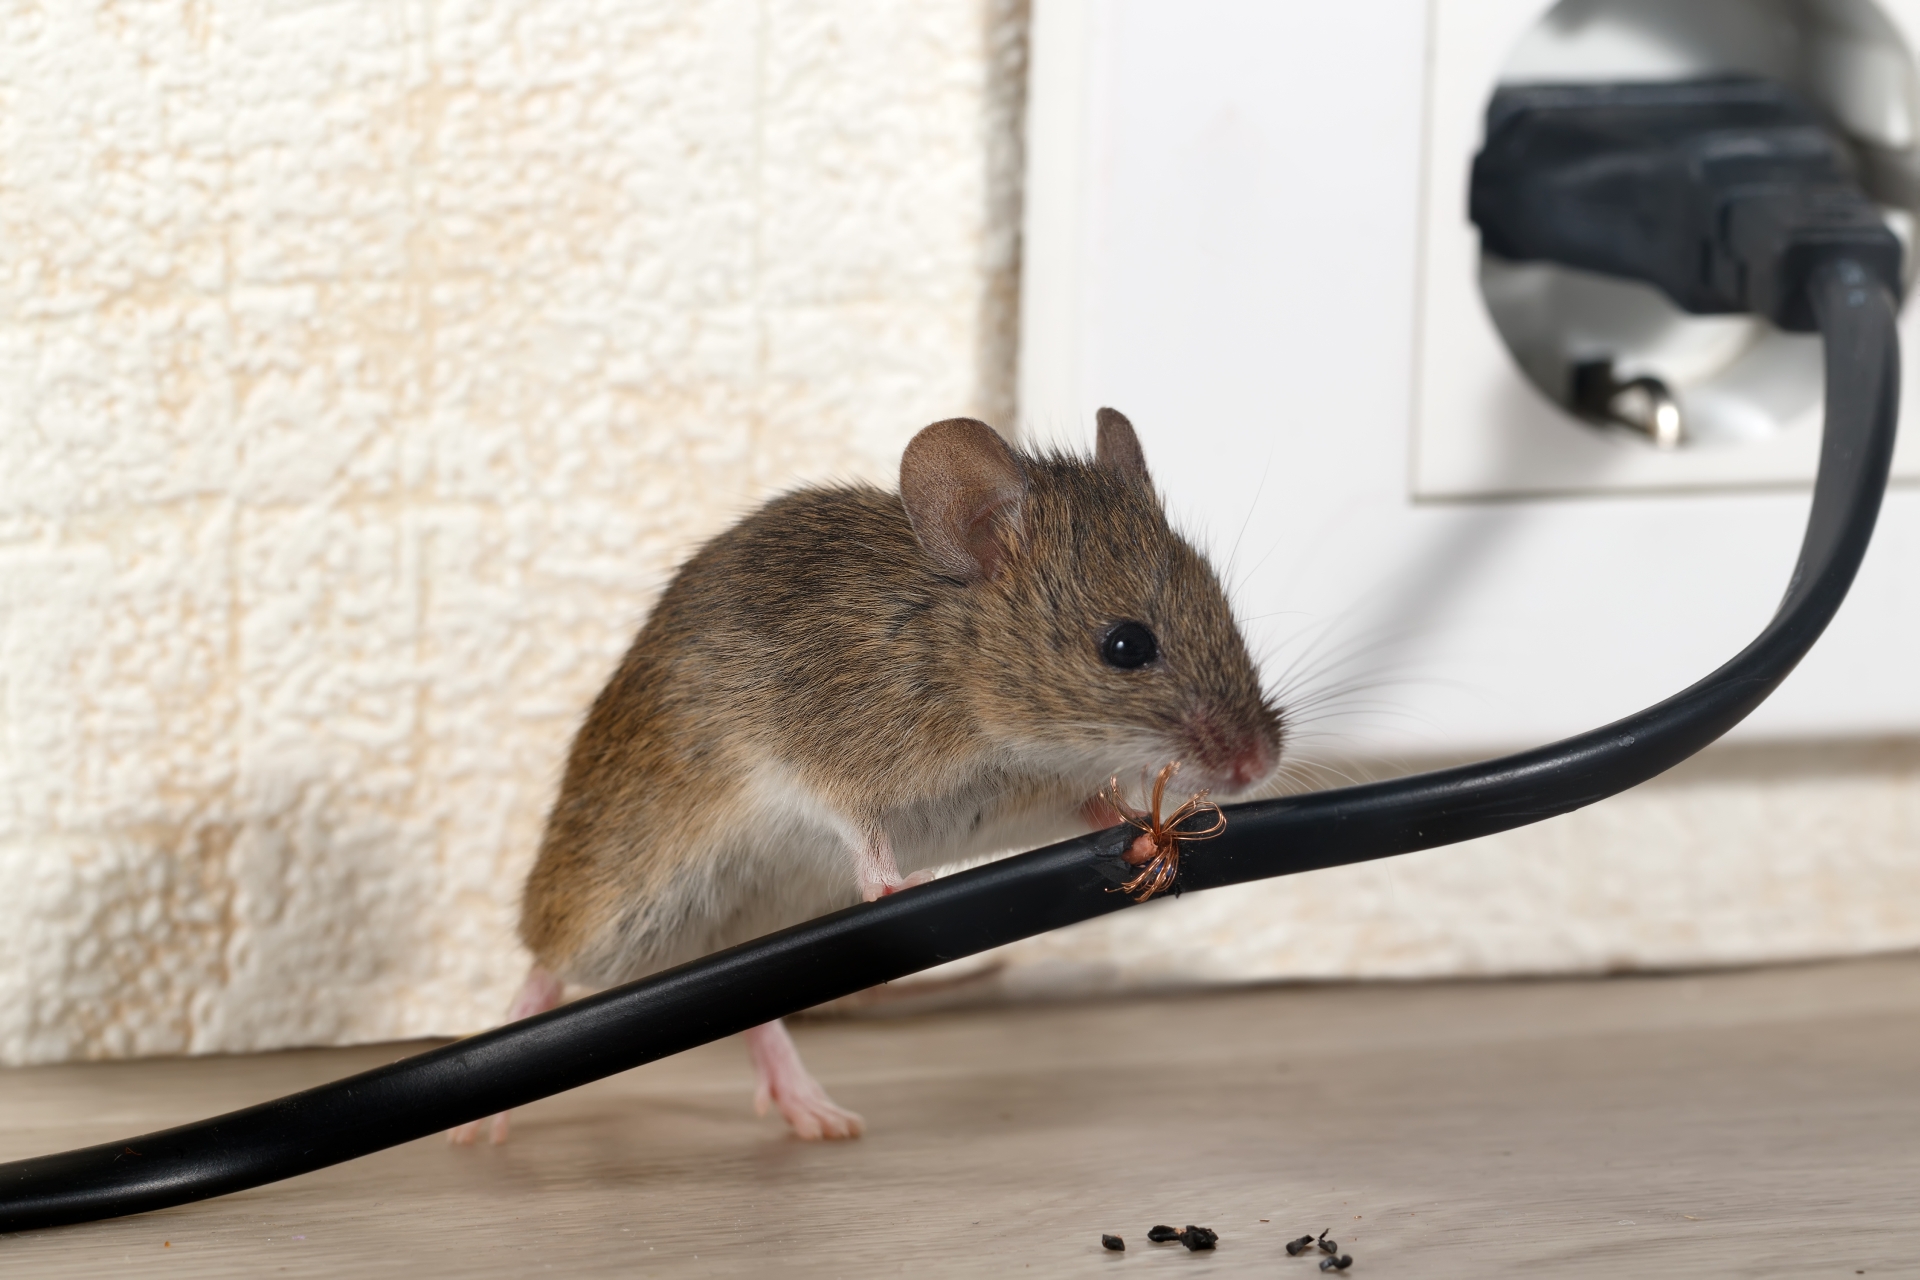 Mice Infestation, Pest Control in Sidcup, DA15. Call Now 020 8166 9746